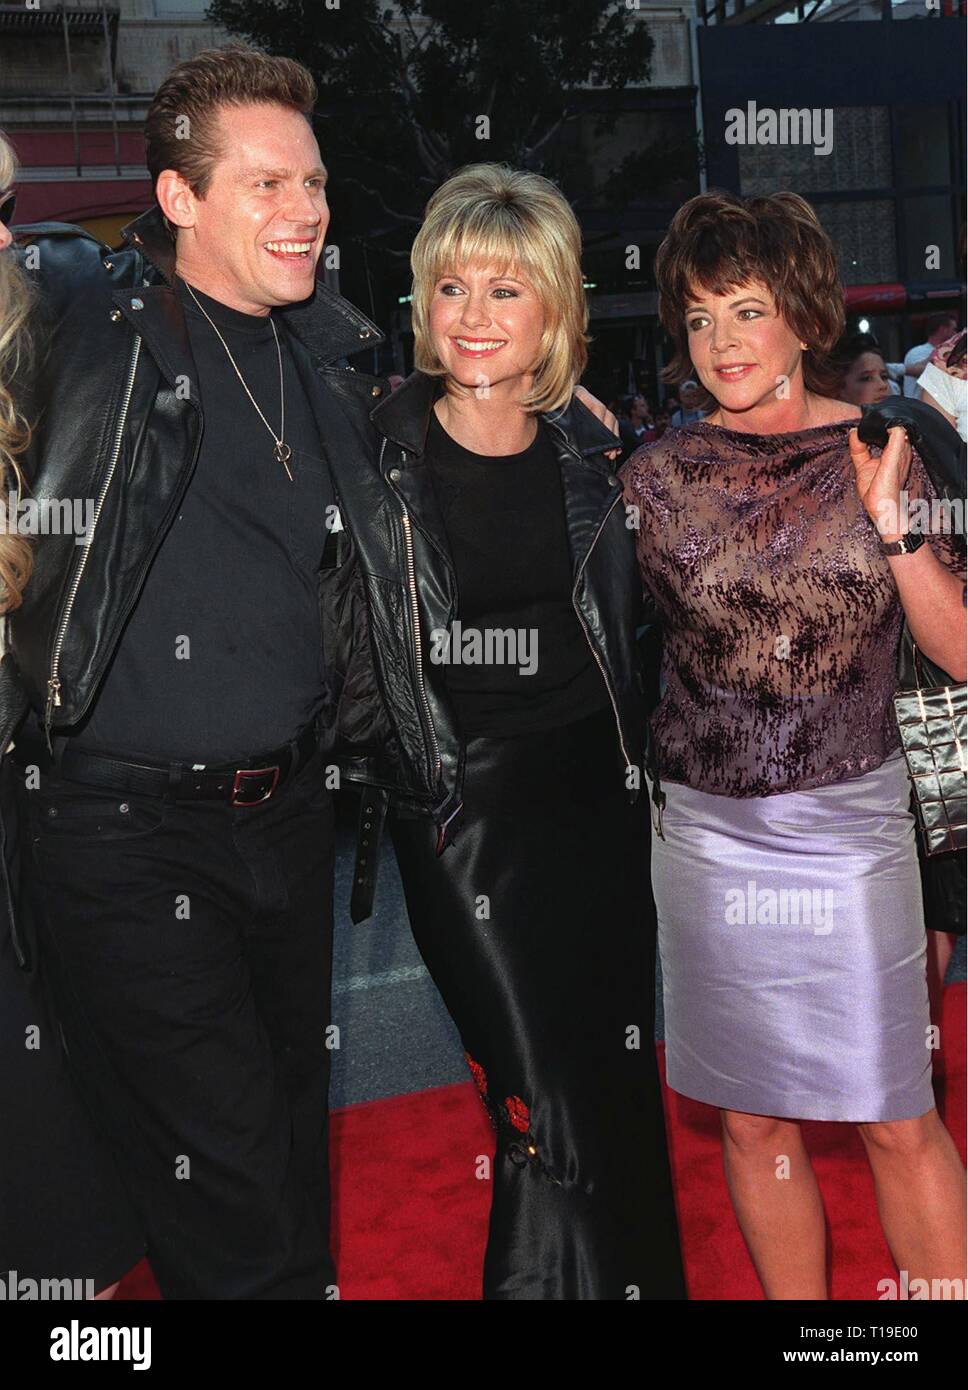 LOS ANGELES, CA - March 15, 1998: "Grease" stars OLIVIA NEWTON-JOHN, STOCKARD CHANNING and JEFF CONAWAY at 20th anniversary re-premiere of "Grease" at Mann's Chinese Theatre, Hollywood. Stock Photo